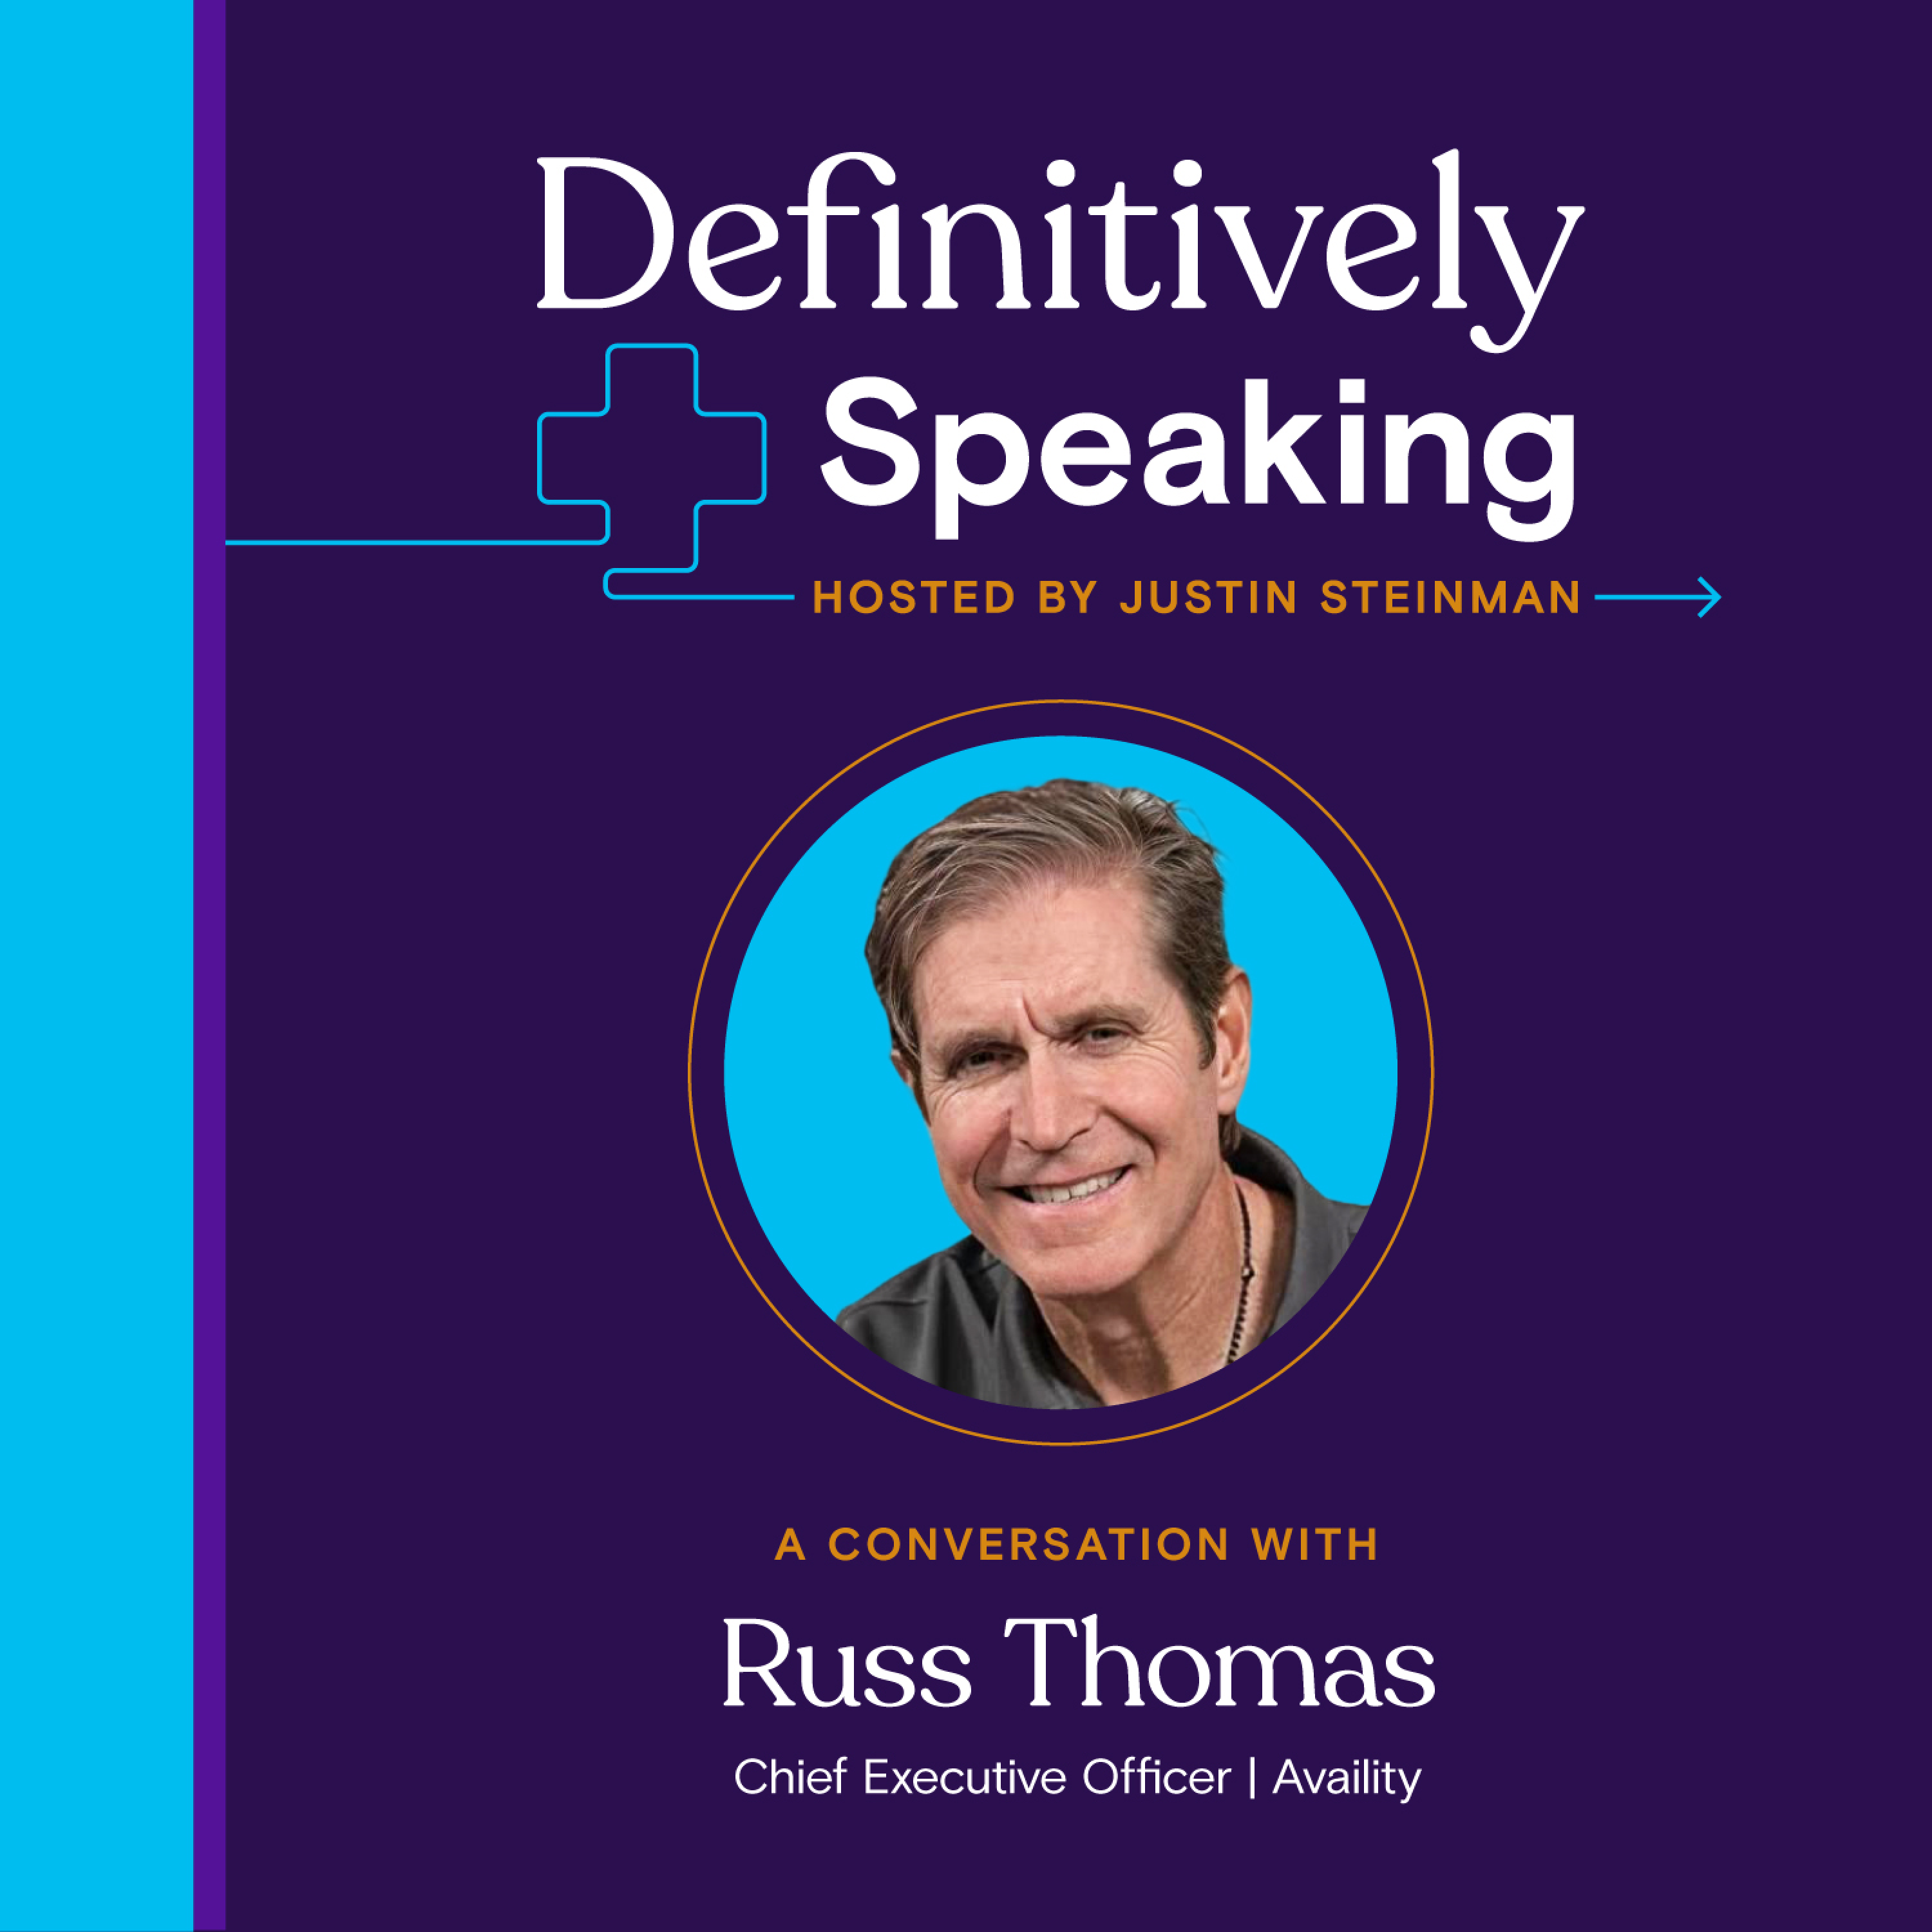 Episode 36: Will we ever get payors and providers to speak the same love language? Russ Thomas of Availity thinks we can – and has a roadmap to do so